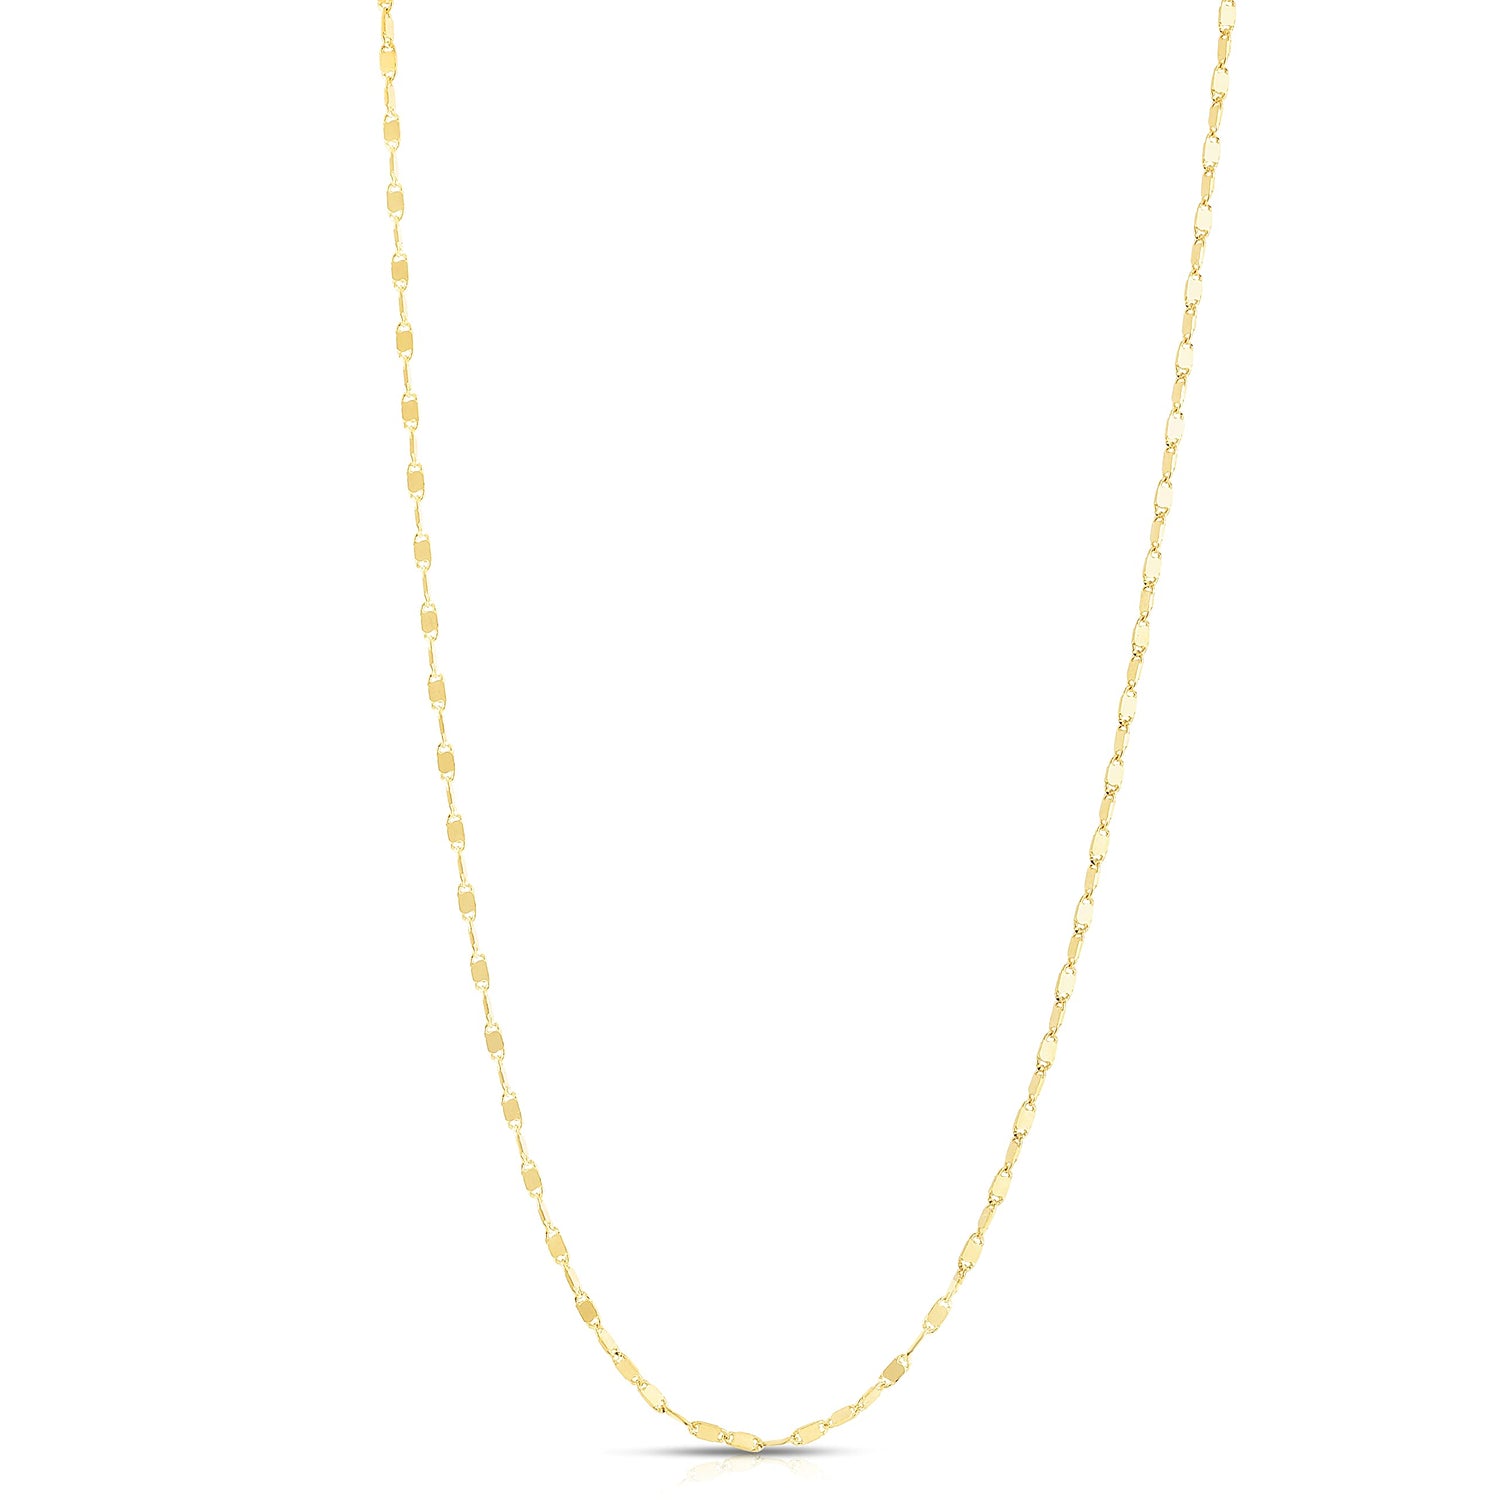 10k Yellow Gold or White Gold Mirror Snail Link Chain Necklace